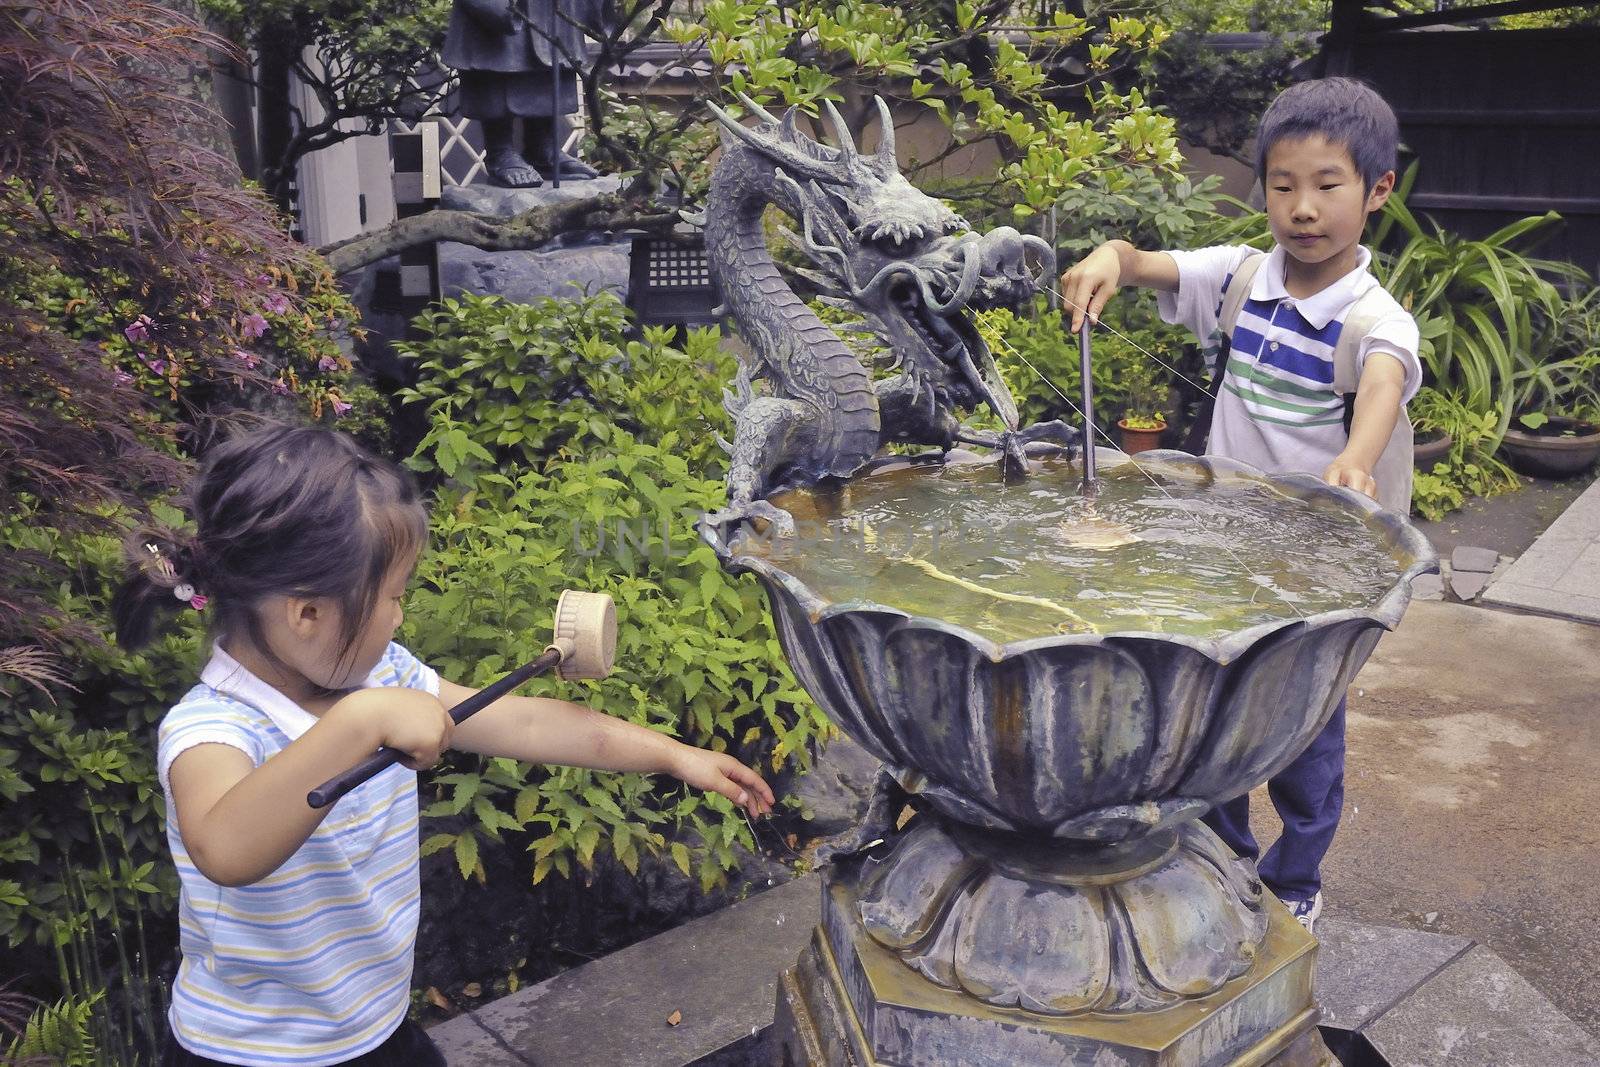 Kamakura, Japan -June 21, 2008: Japanese children wash hands in traditional water source before entrance to Buddhist temple